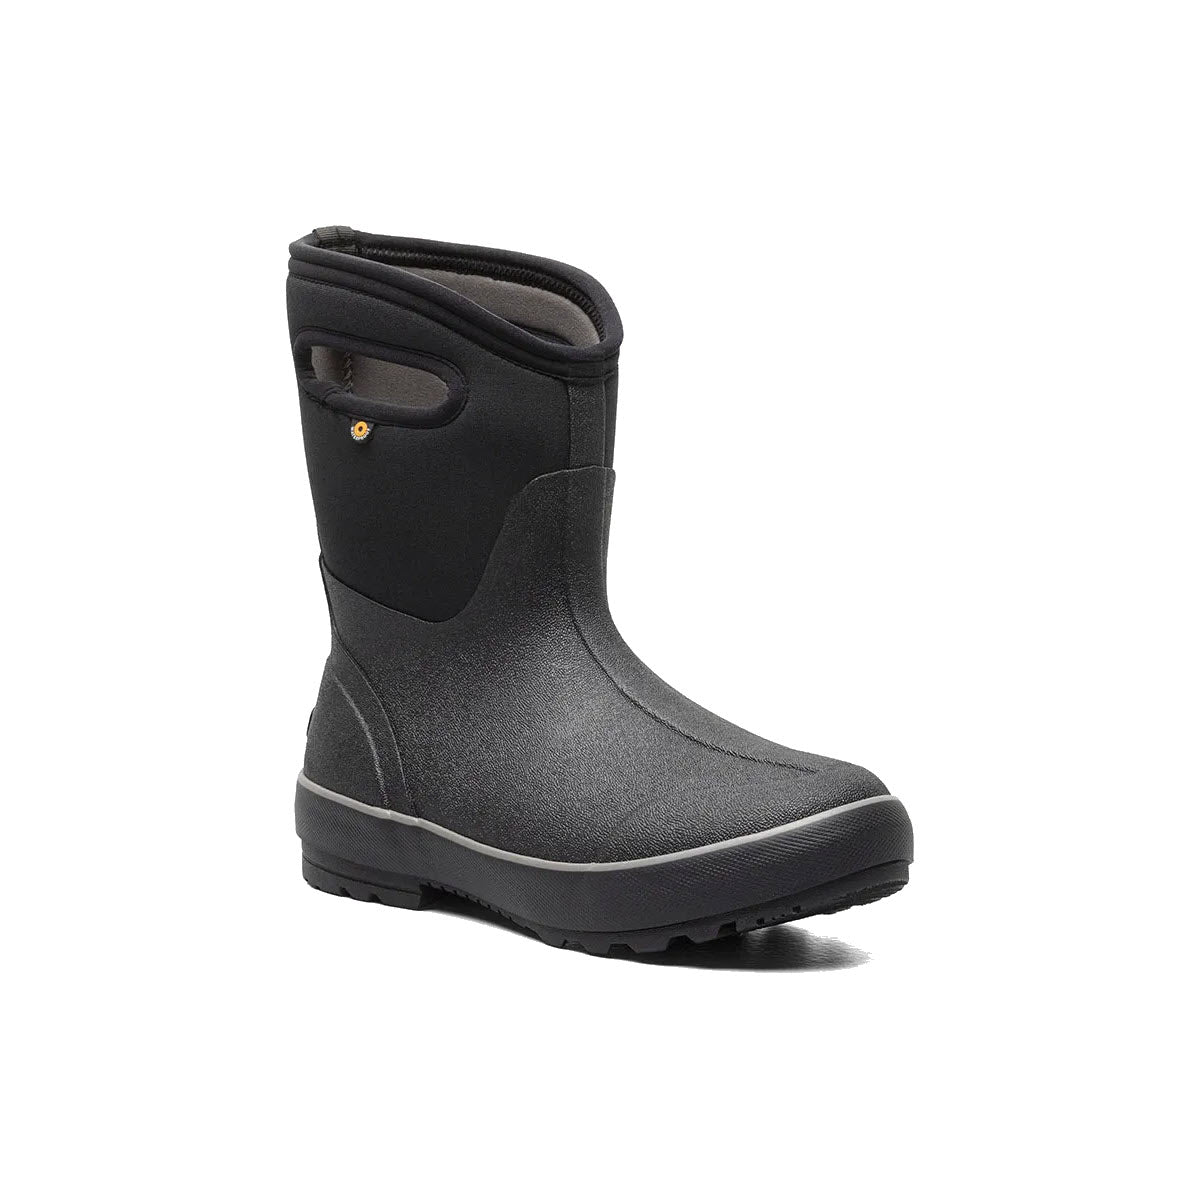 A black Bogs Classic II Mid Black - Womens eco-friendly waterproof boot against a white background.